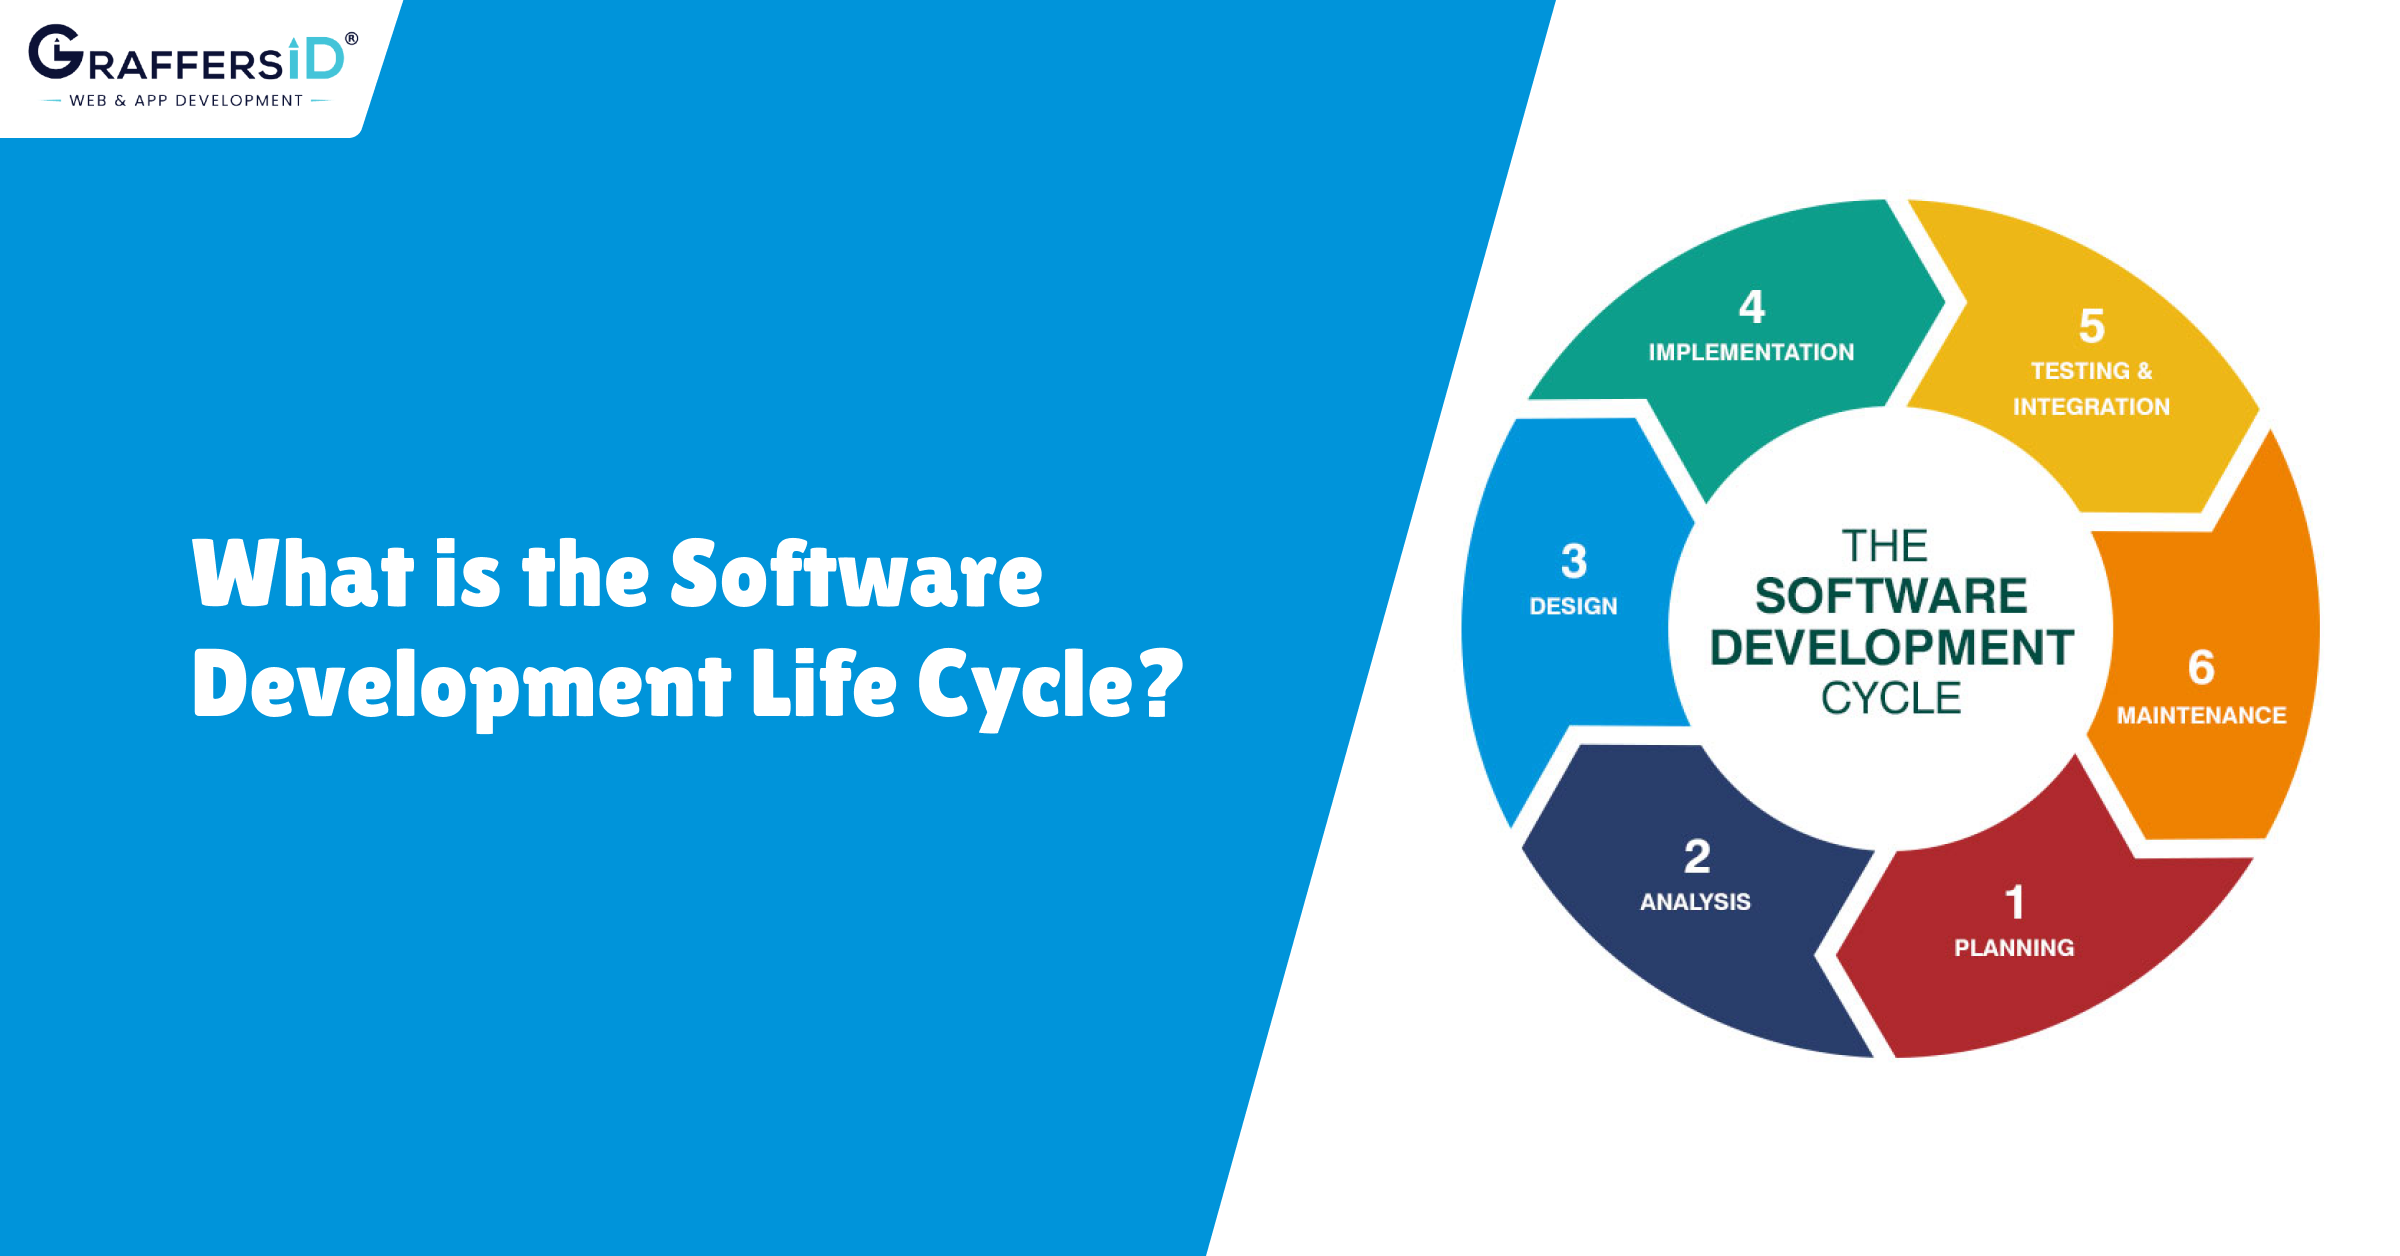 What is the Software Development Life Cycle (SDLC)?